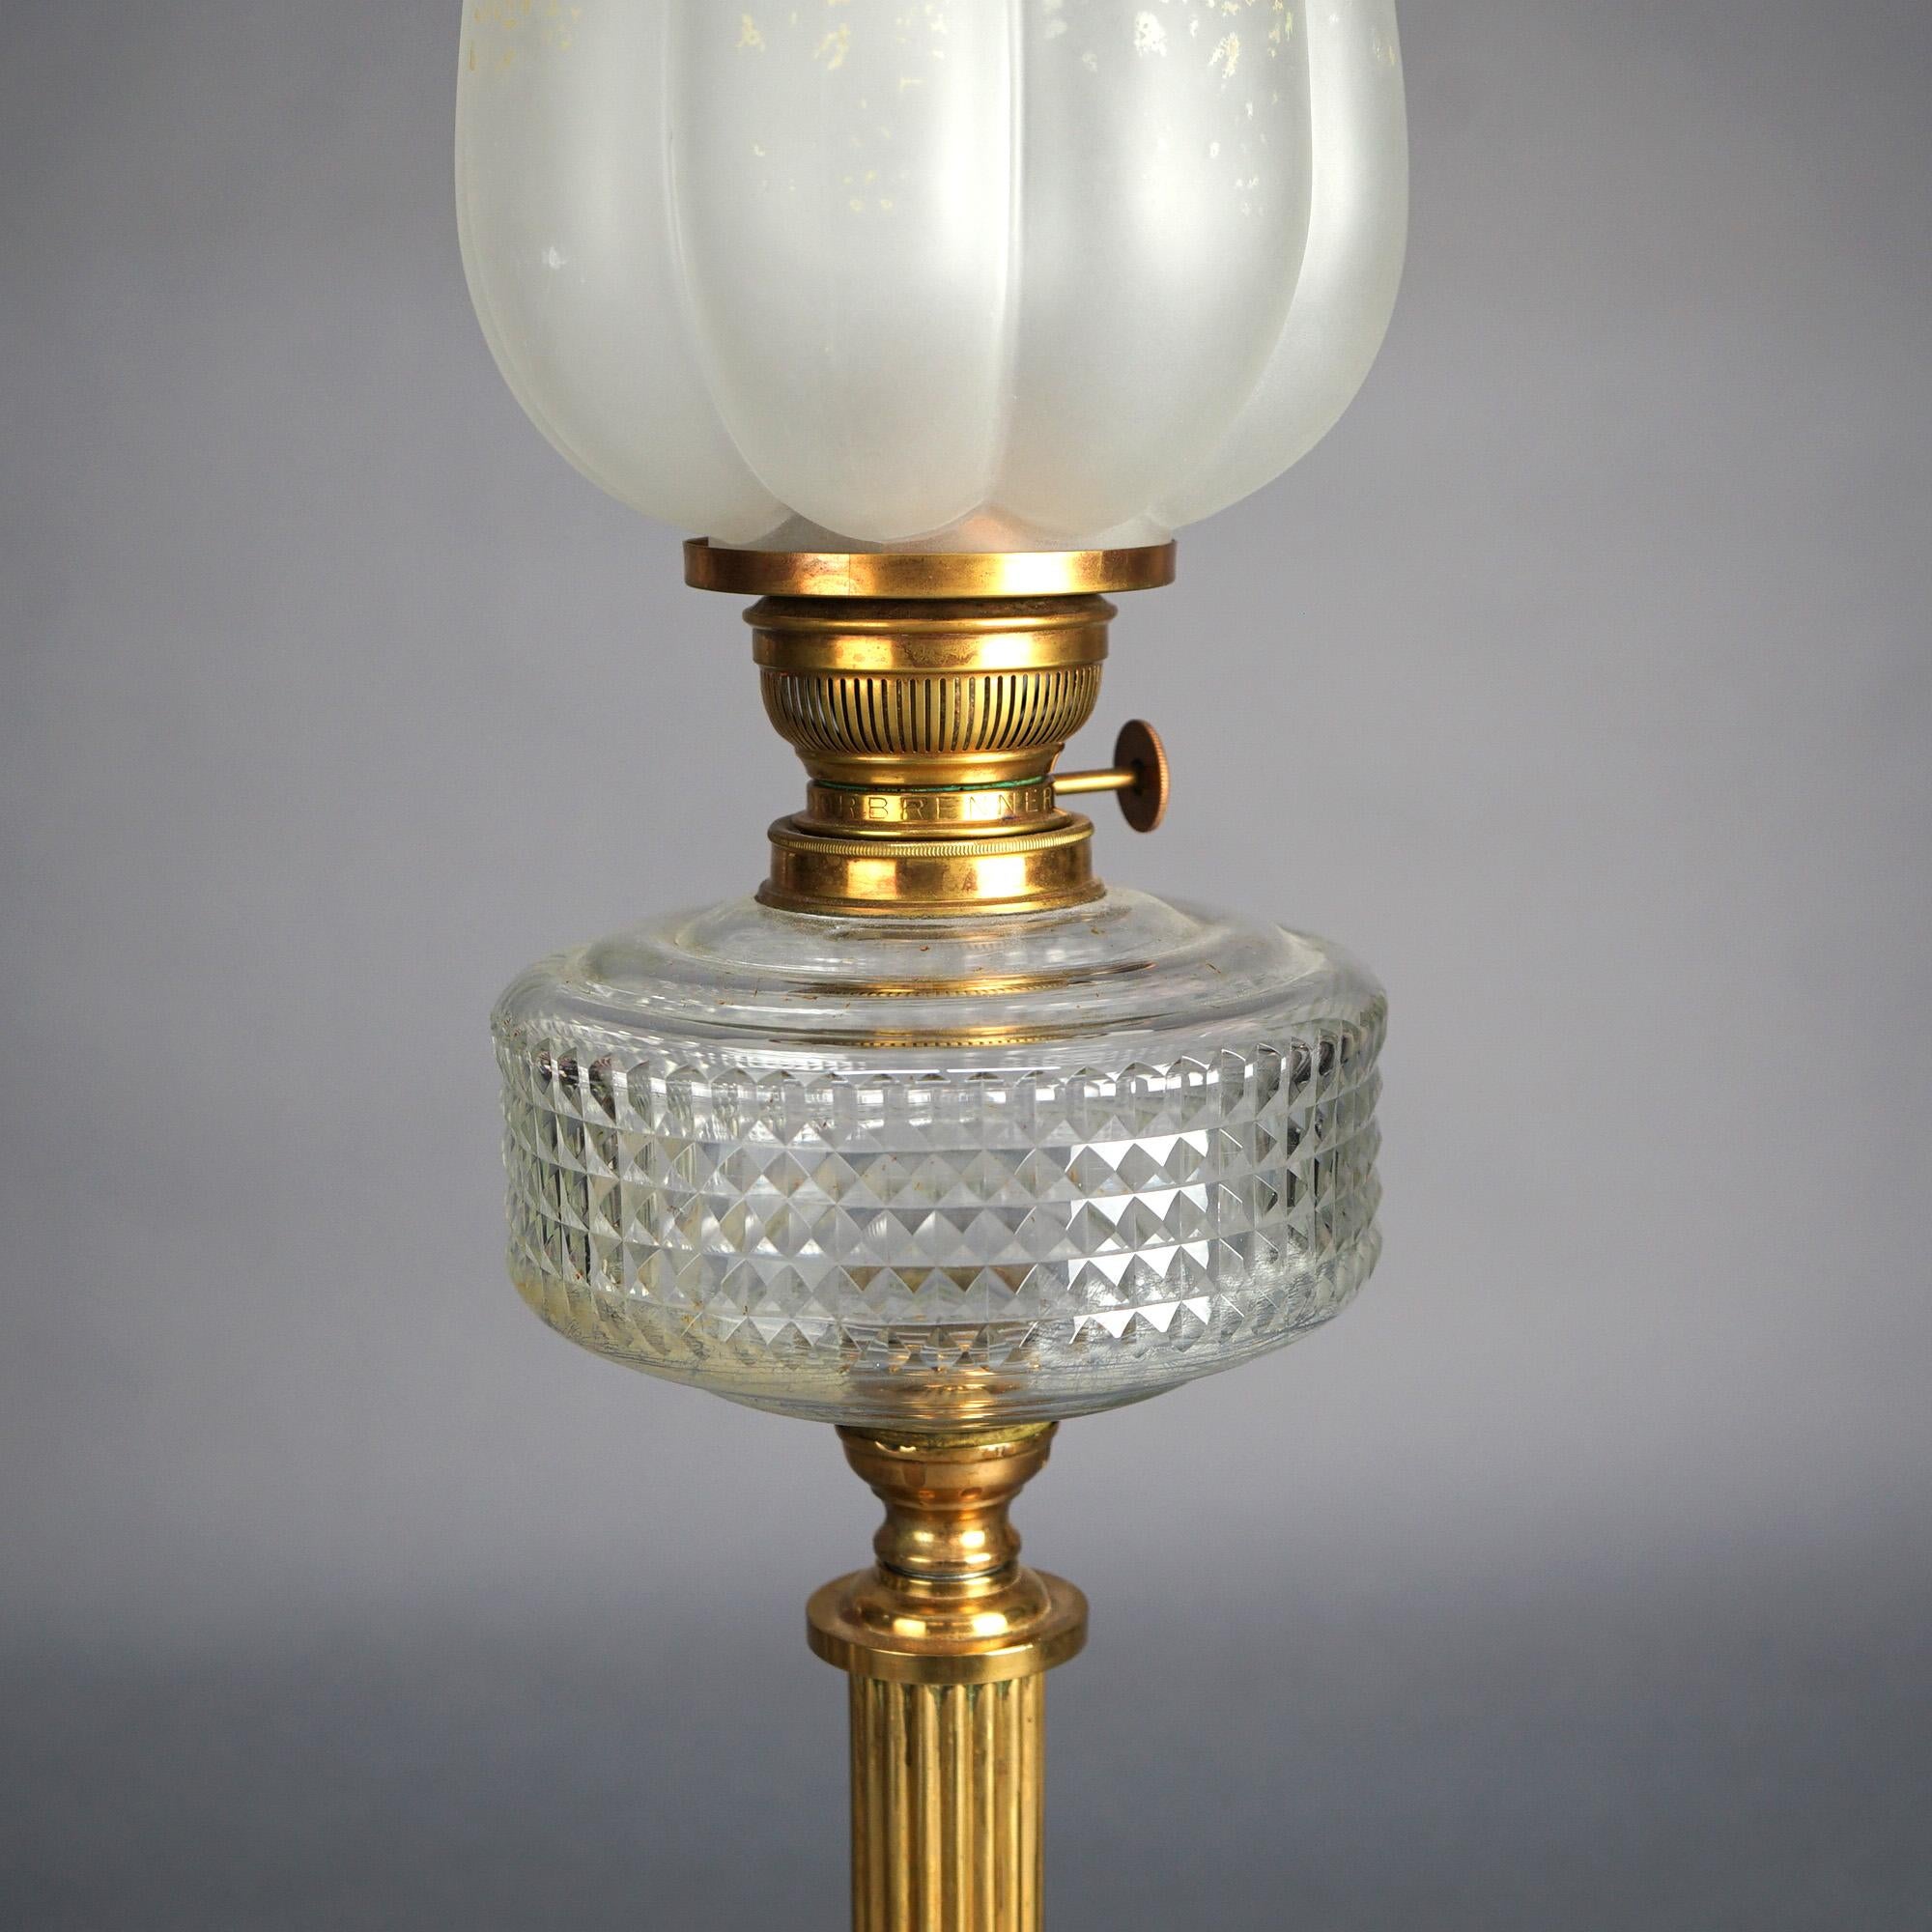 Antique Neoclassical Bronze Oil Lamp with Floral Ripple Glass Shade C1890 For Sale 3